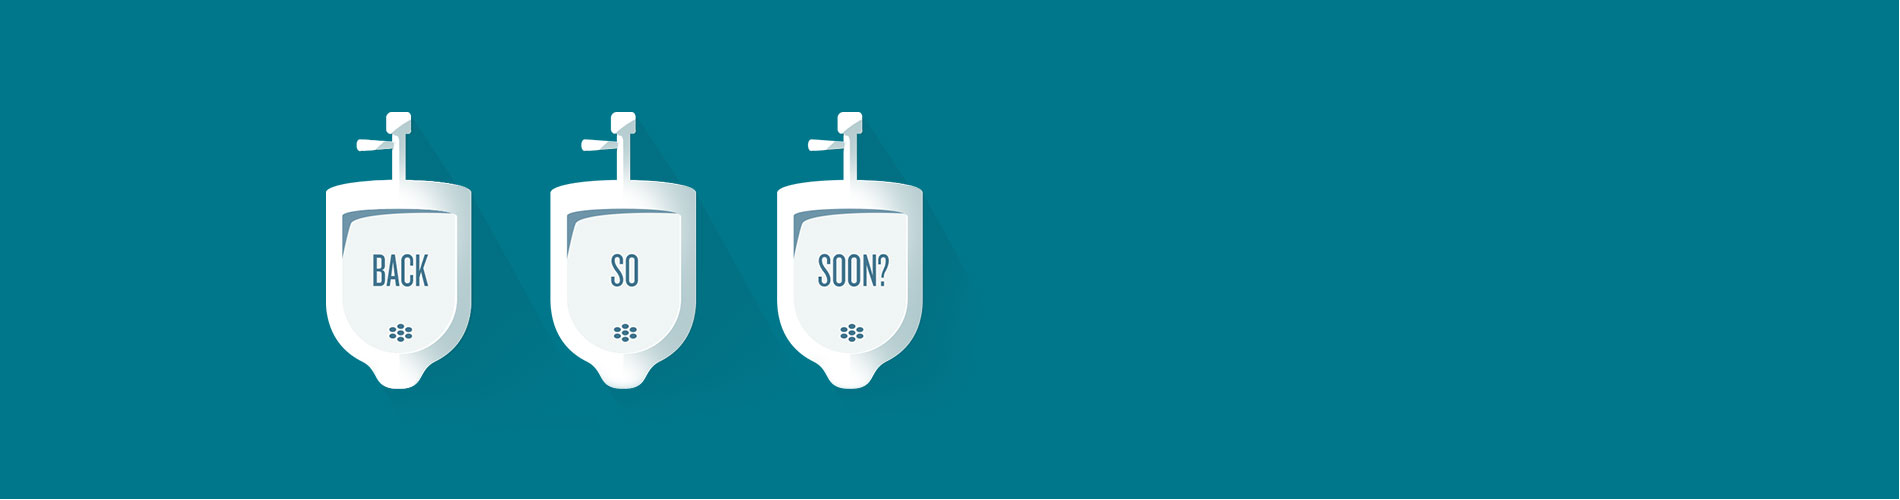 Illustration of urinals with "Back So Soon" text.